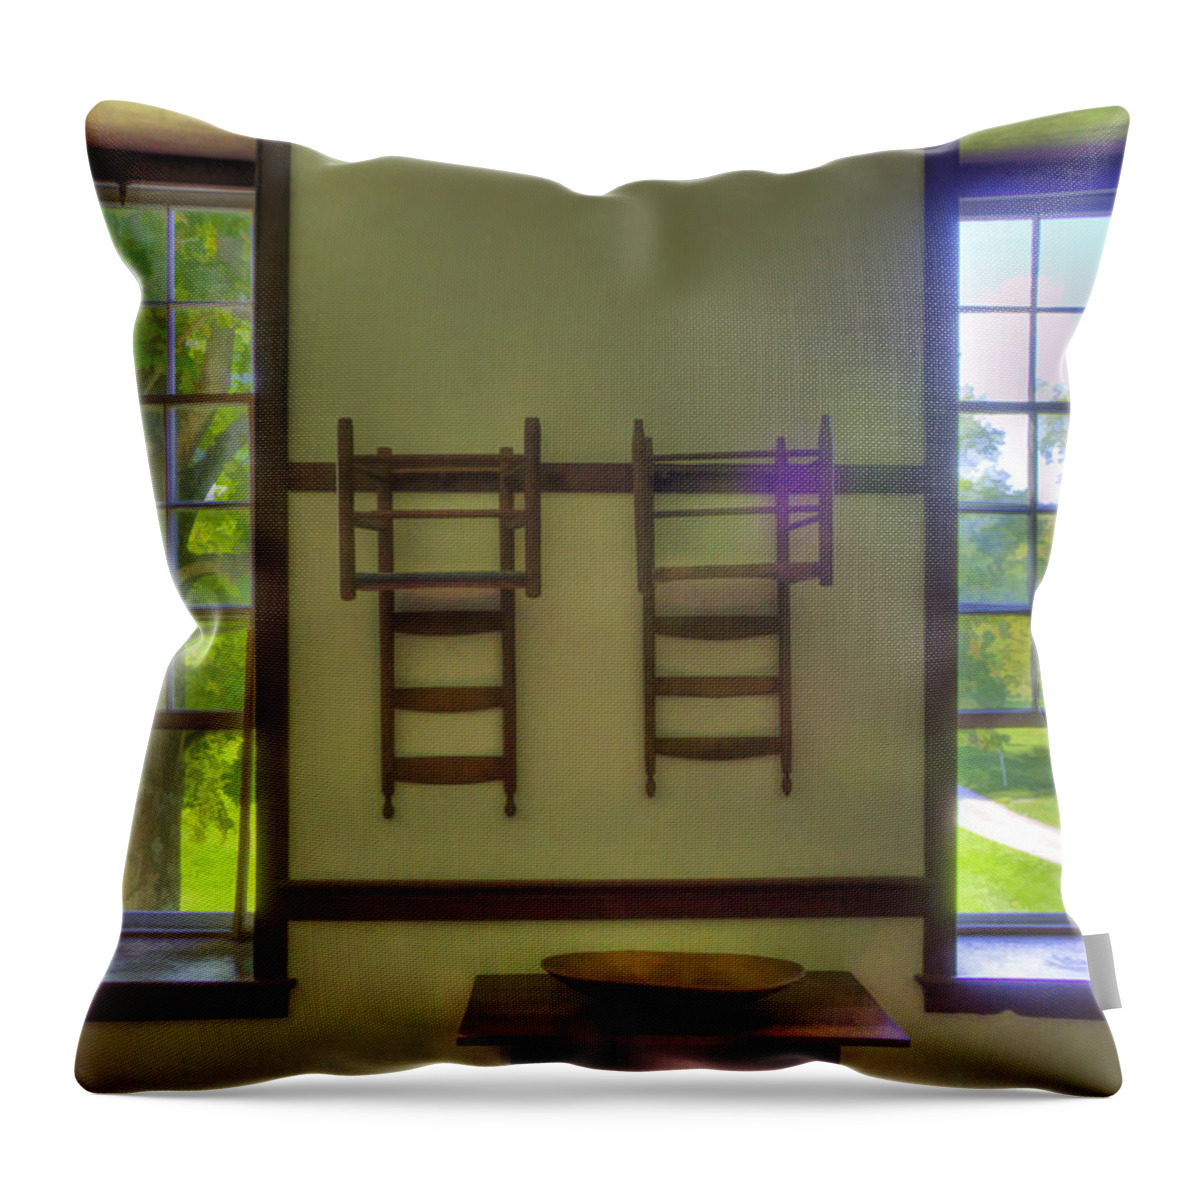 Shaker Throw Pillow featuring the photograph Shaker Dining by Sam Davis Johnson